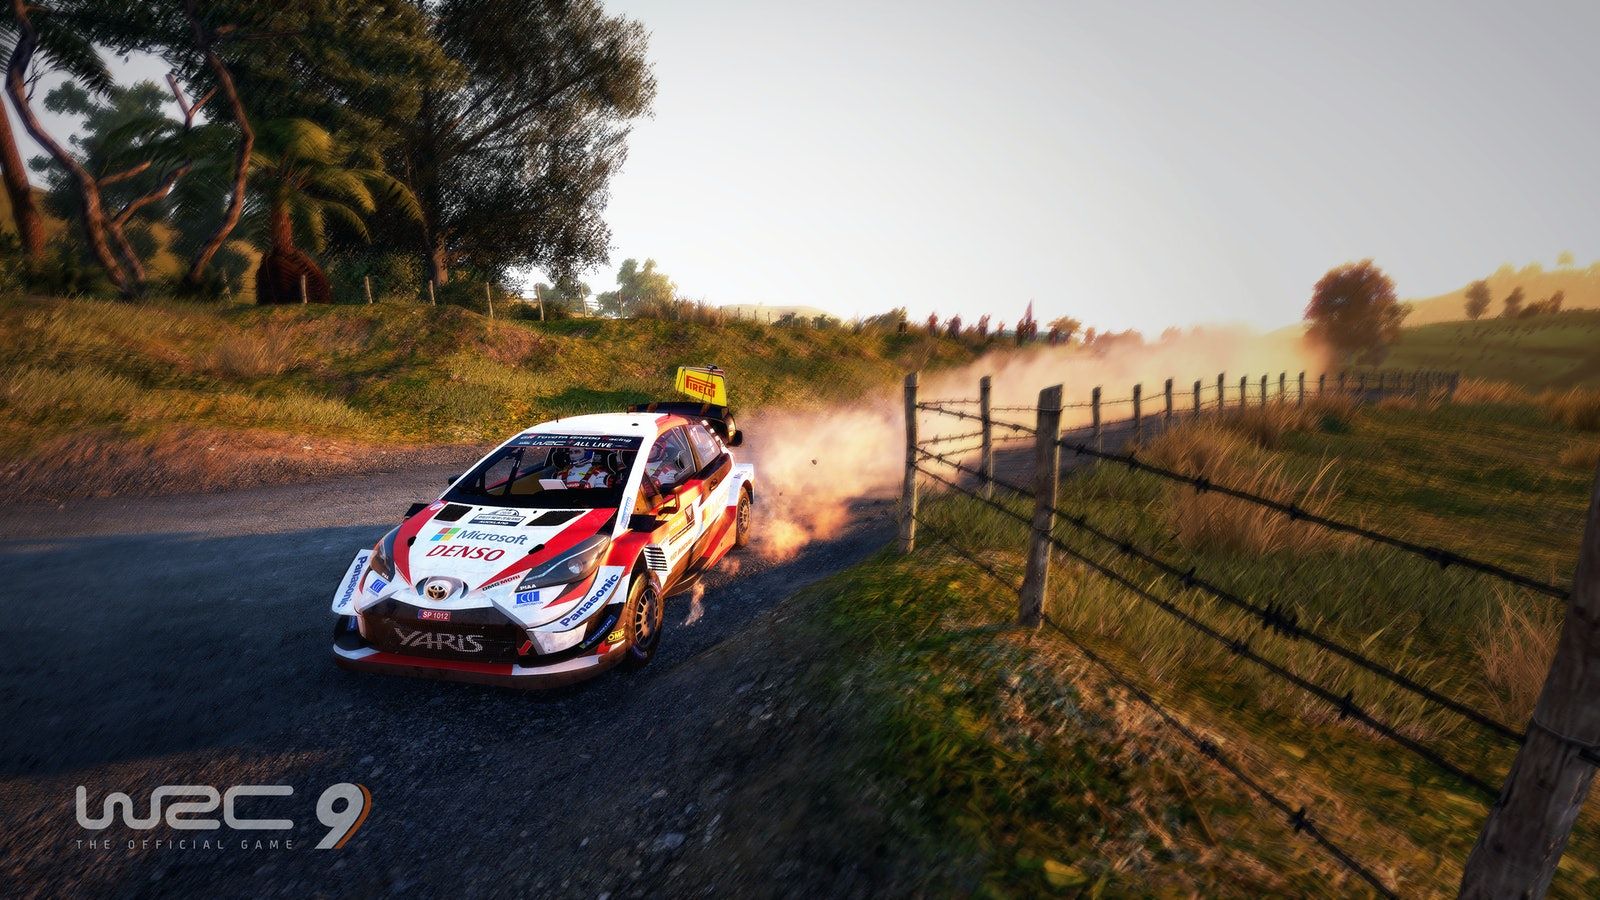 Toyota Yaris up for grabs for WRC Esports winner